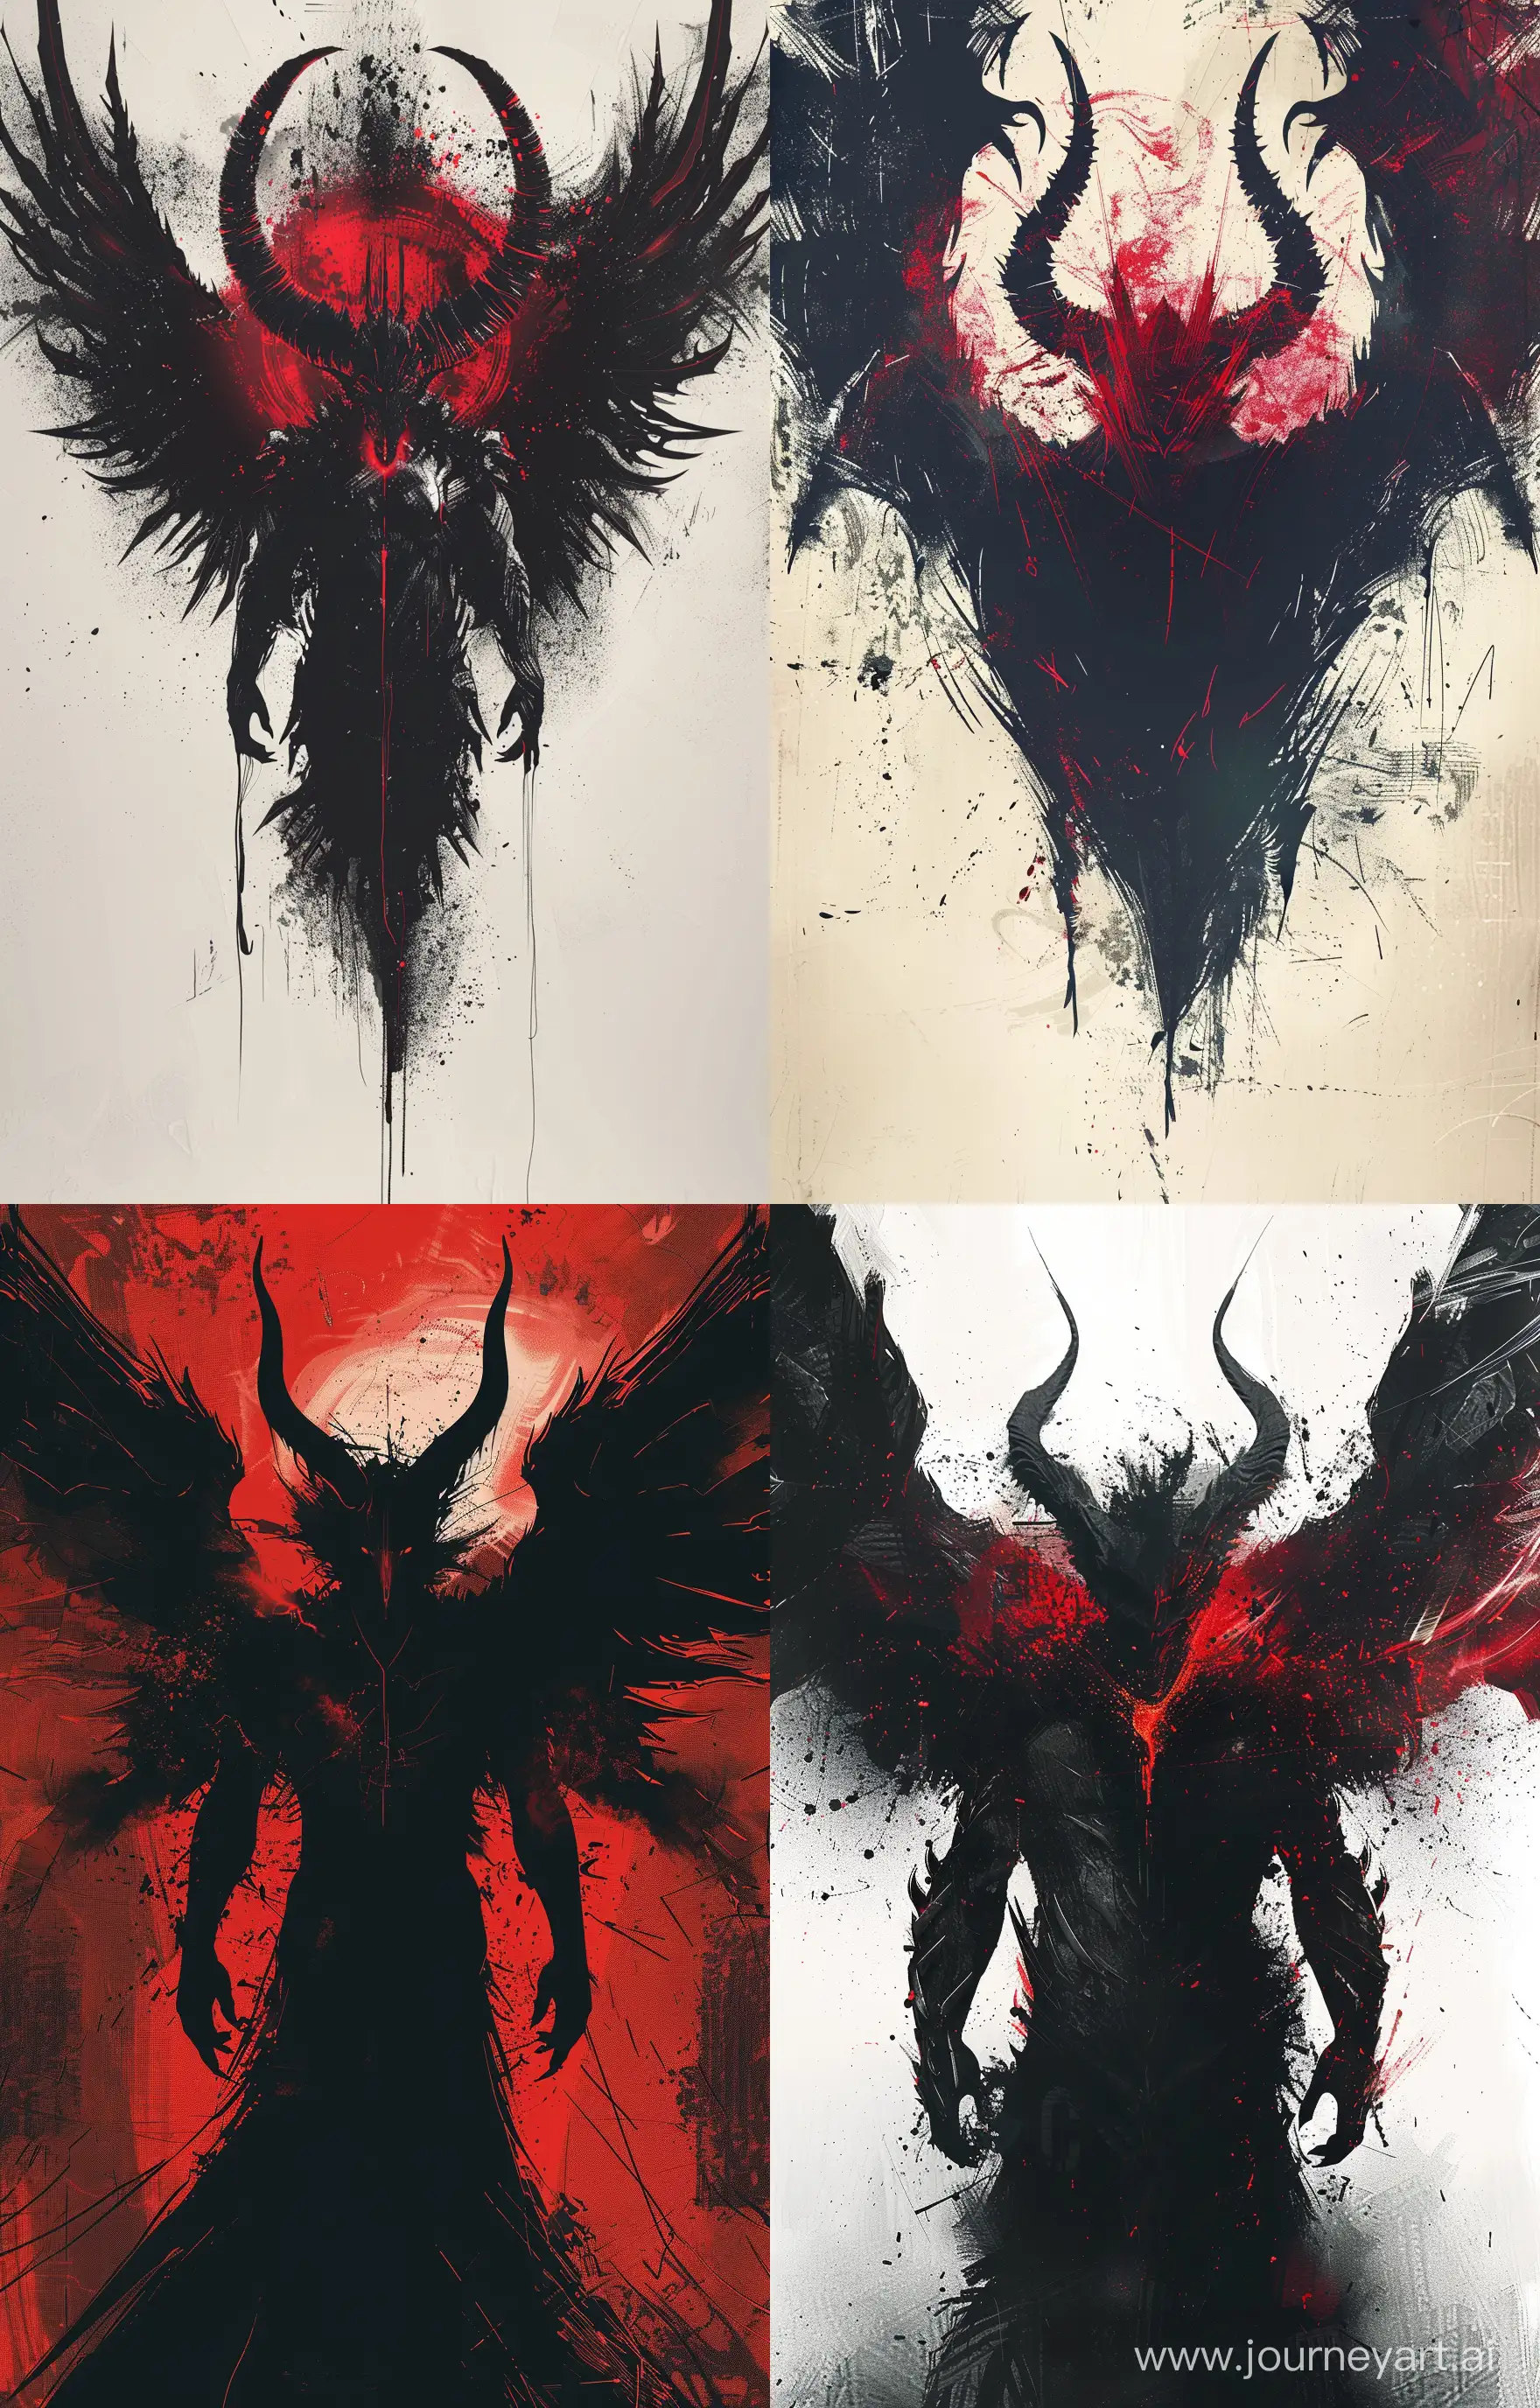 Gigantic-Abstract-Demon-Silhouette-with-Ominous-Red-and-Black-Contrast